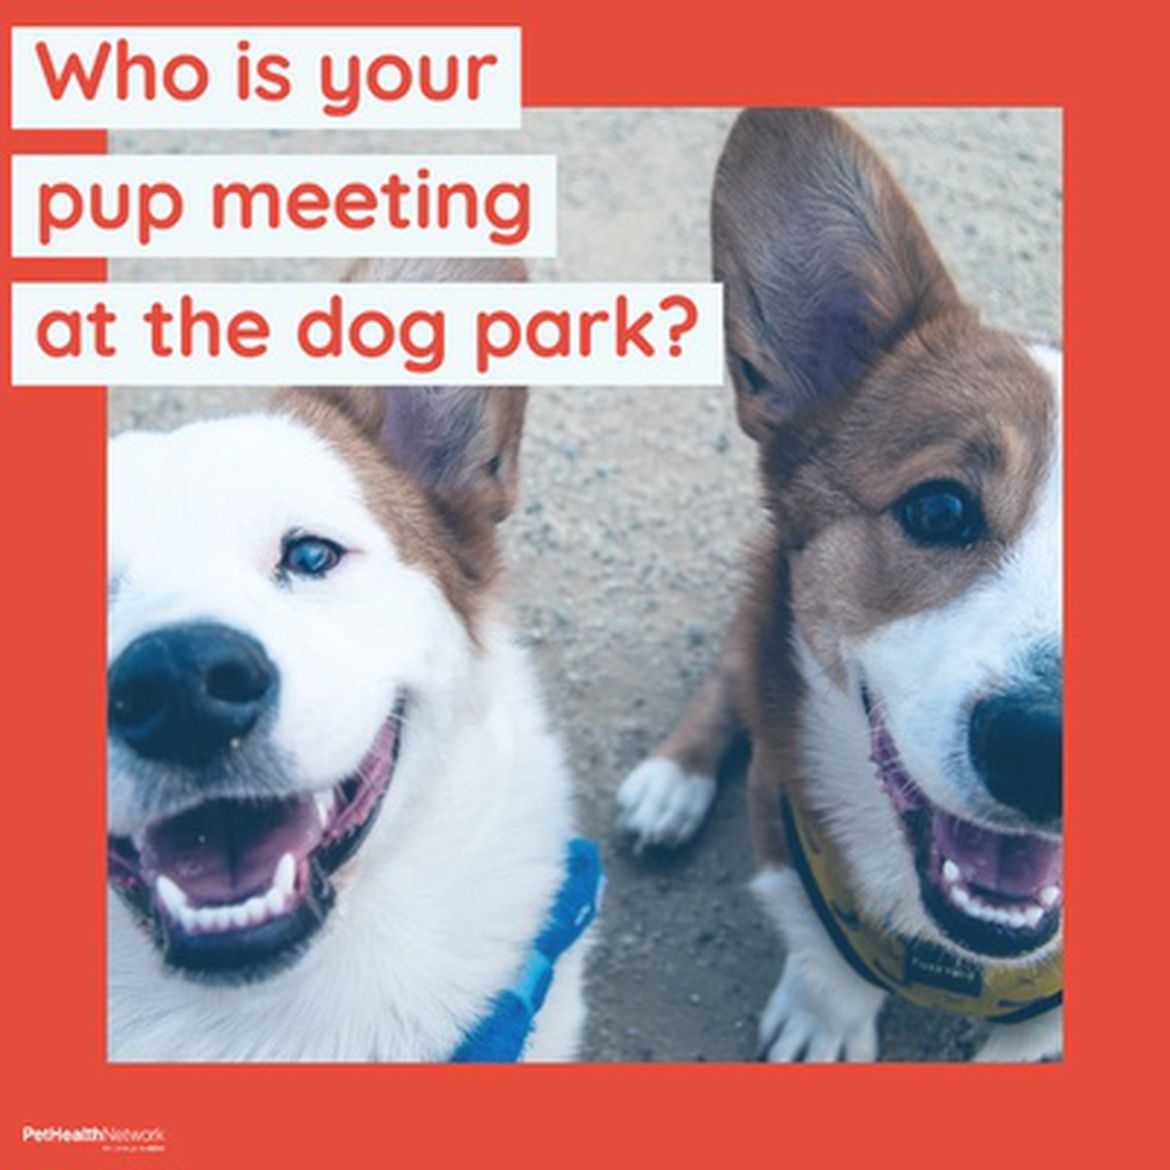 Social media post about a study on parasites found at dog parks.